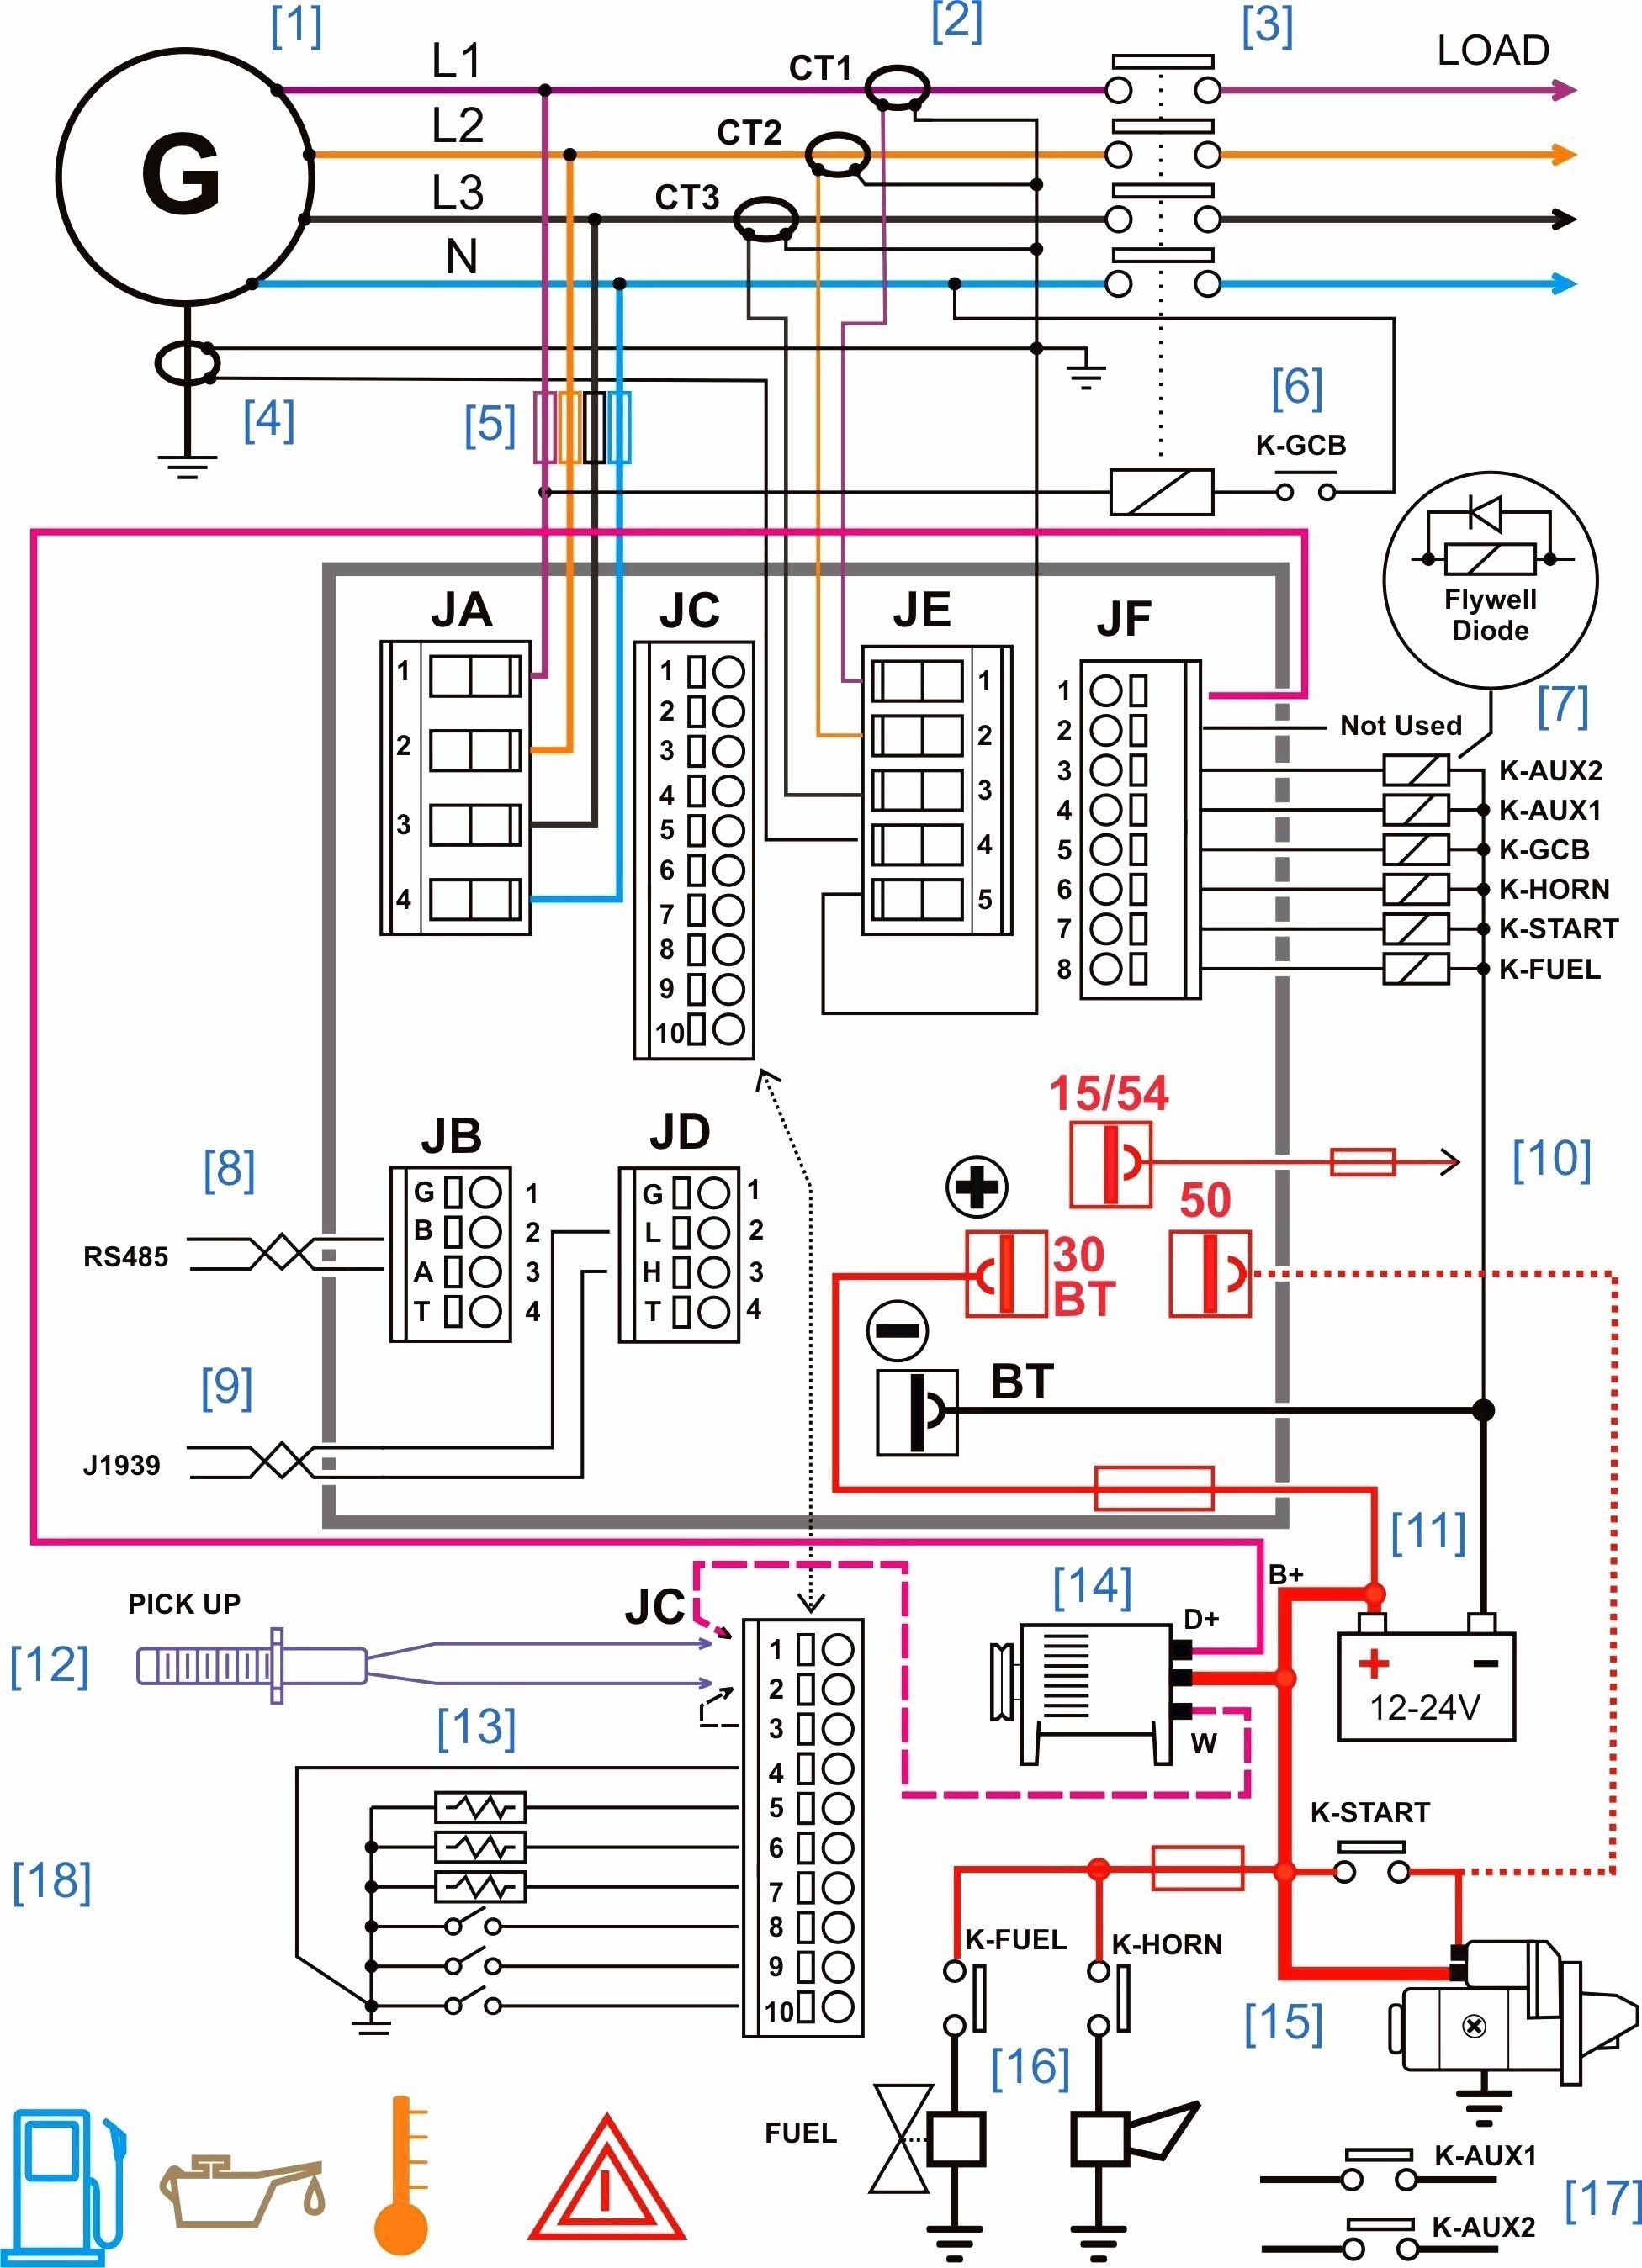 Wiring Diagram In A Car Inspirationa Car Stereo Wiring Diagrams 0d